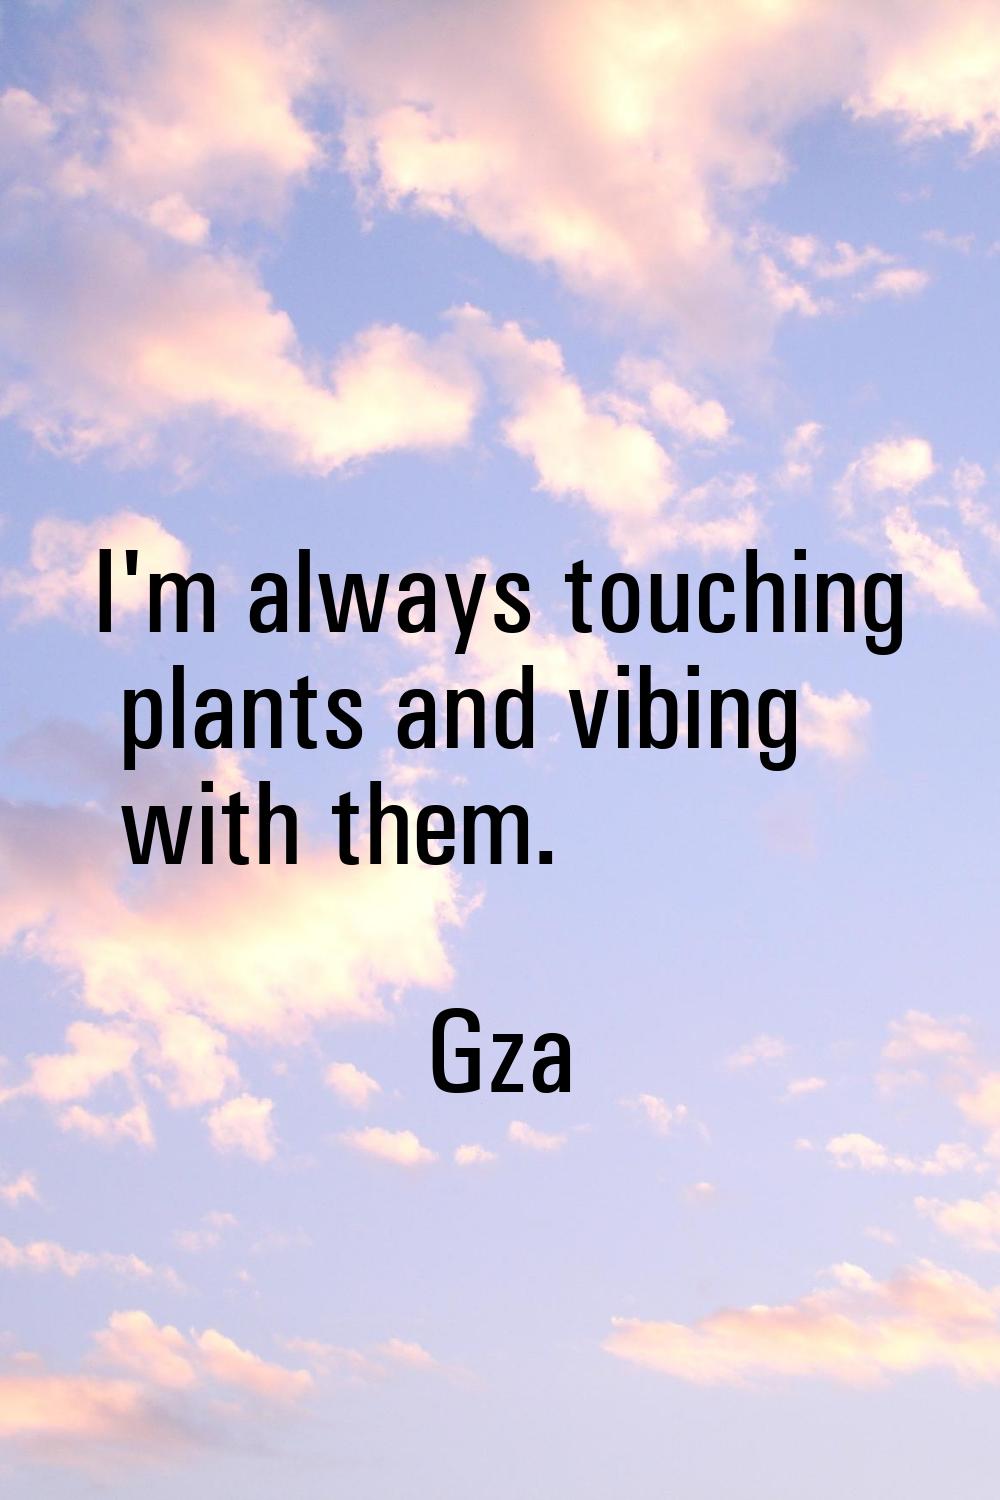 I'm always touching plants and vibing with them.